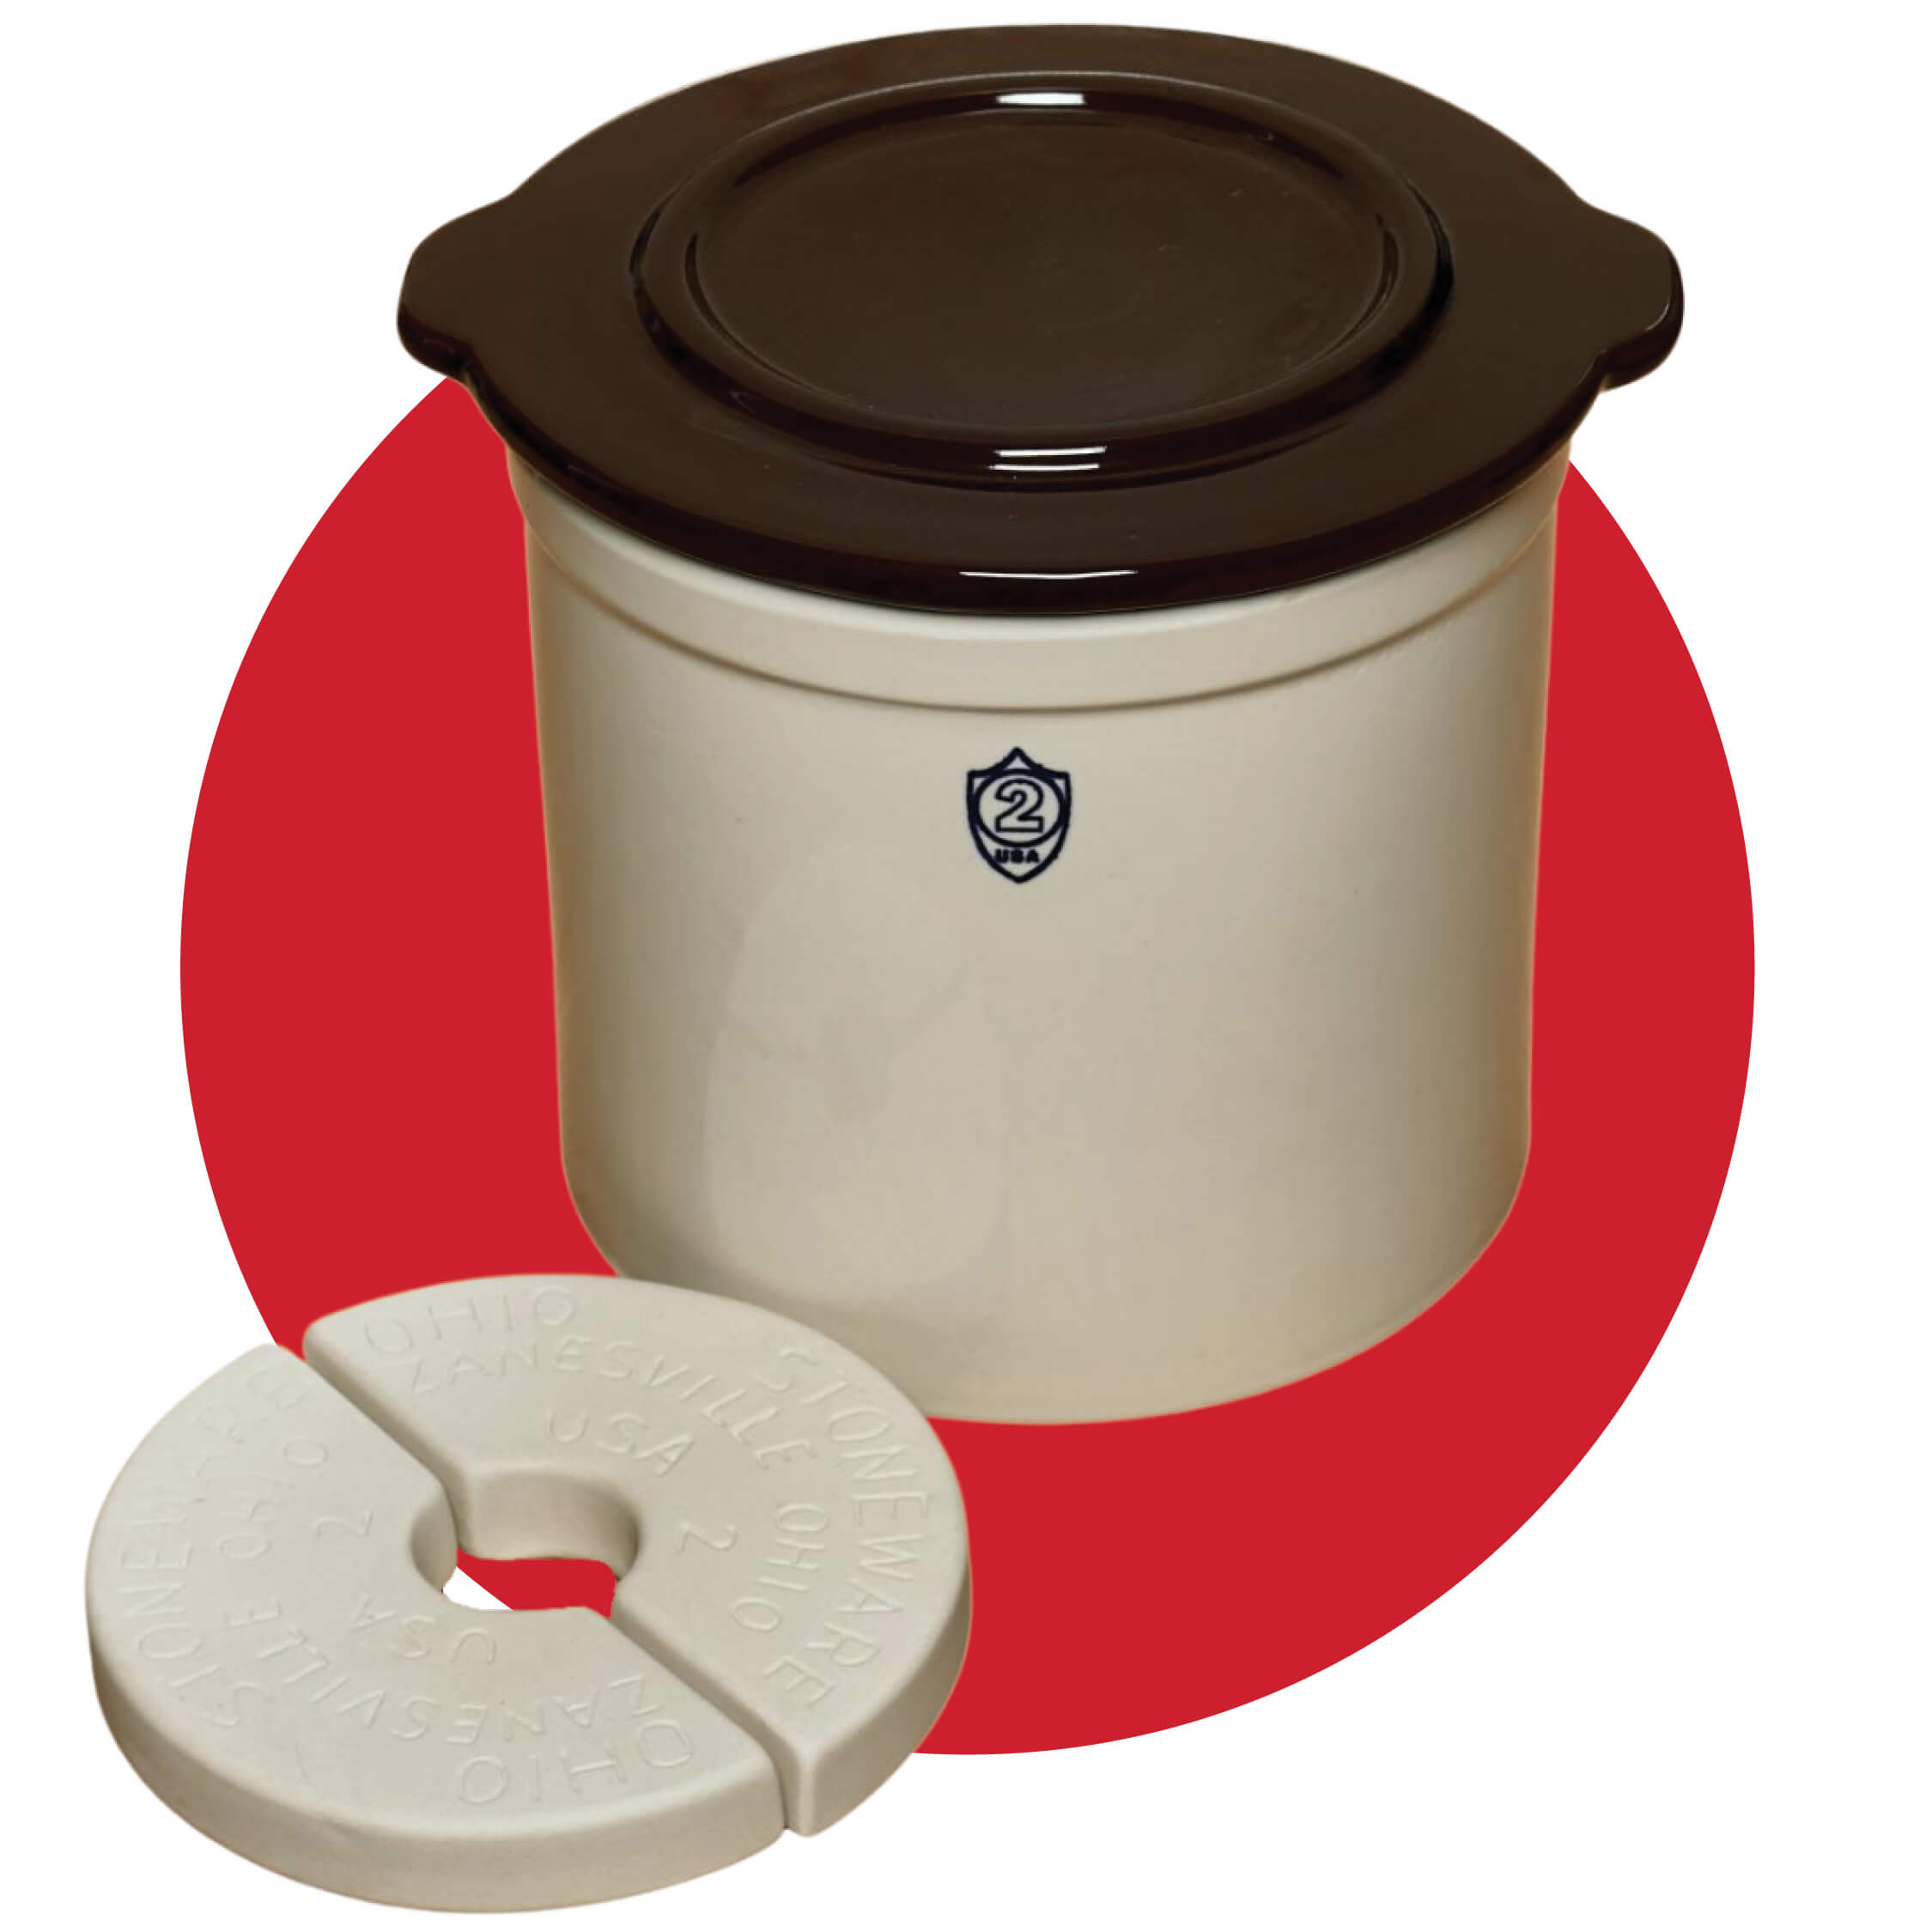 A crock set and two weights on a red circle